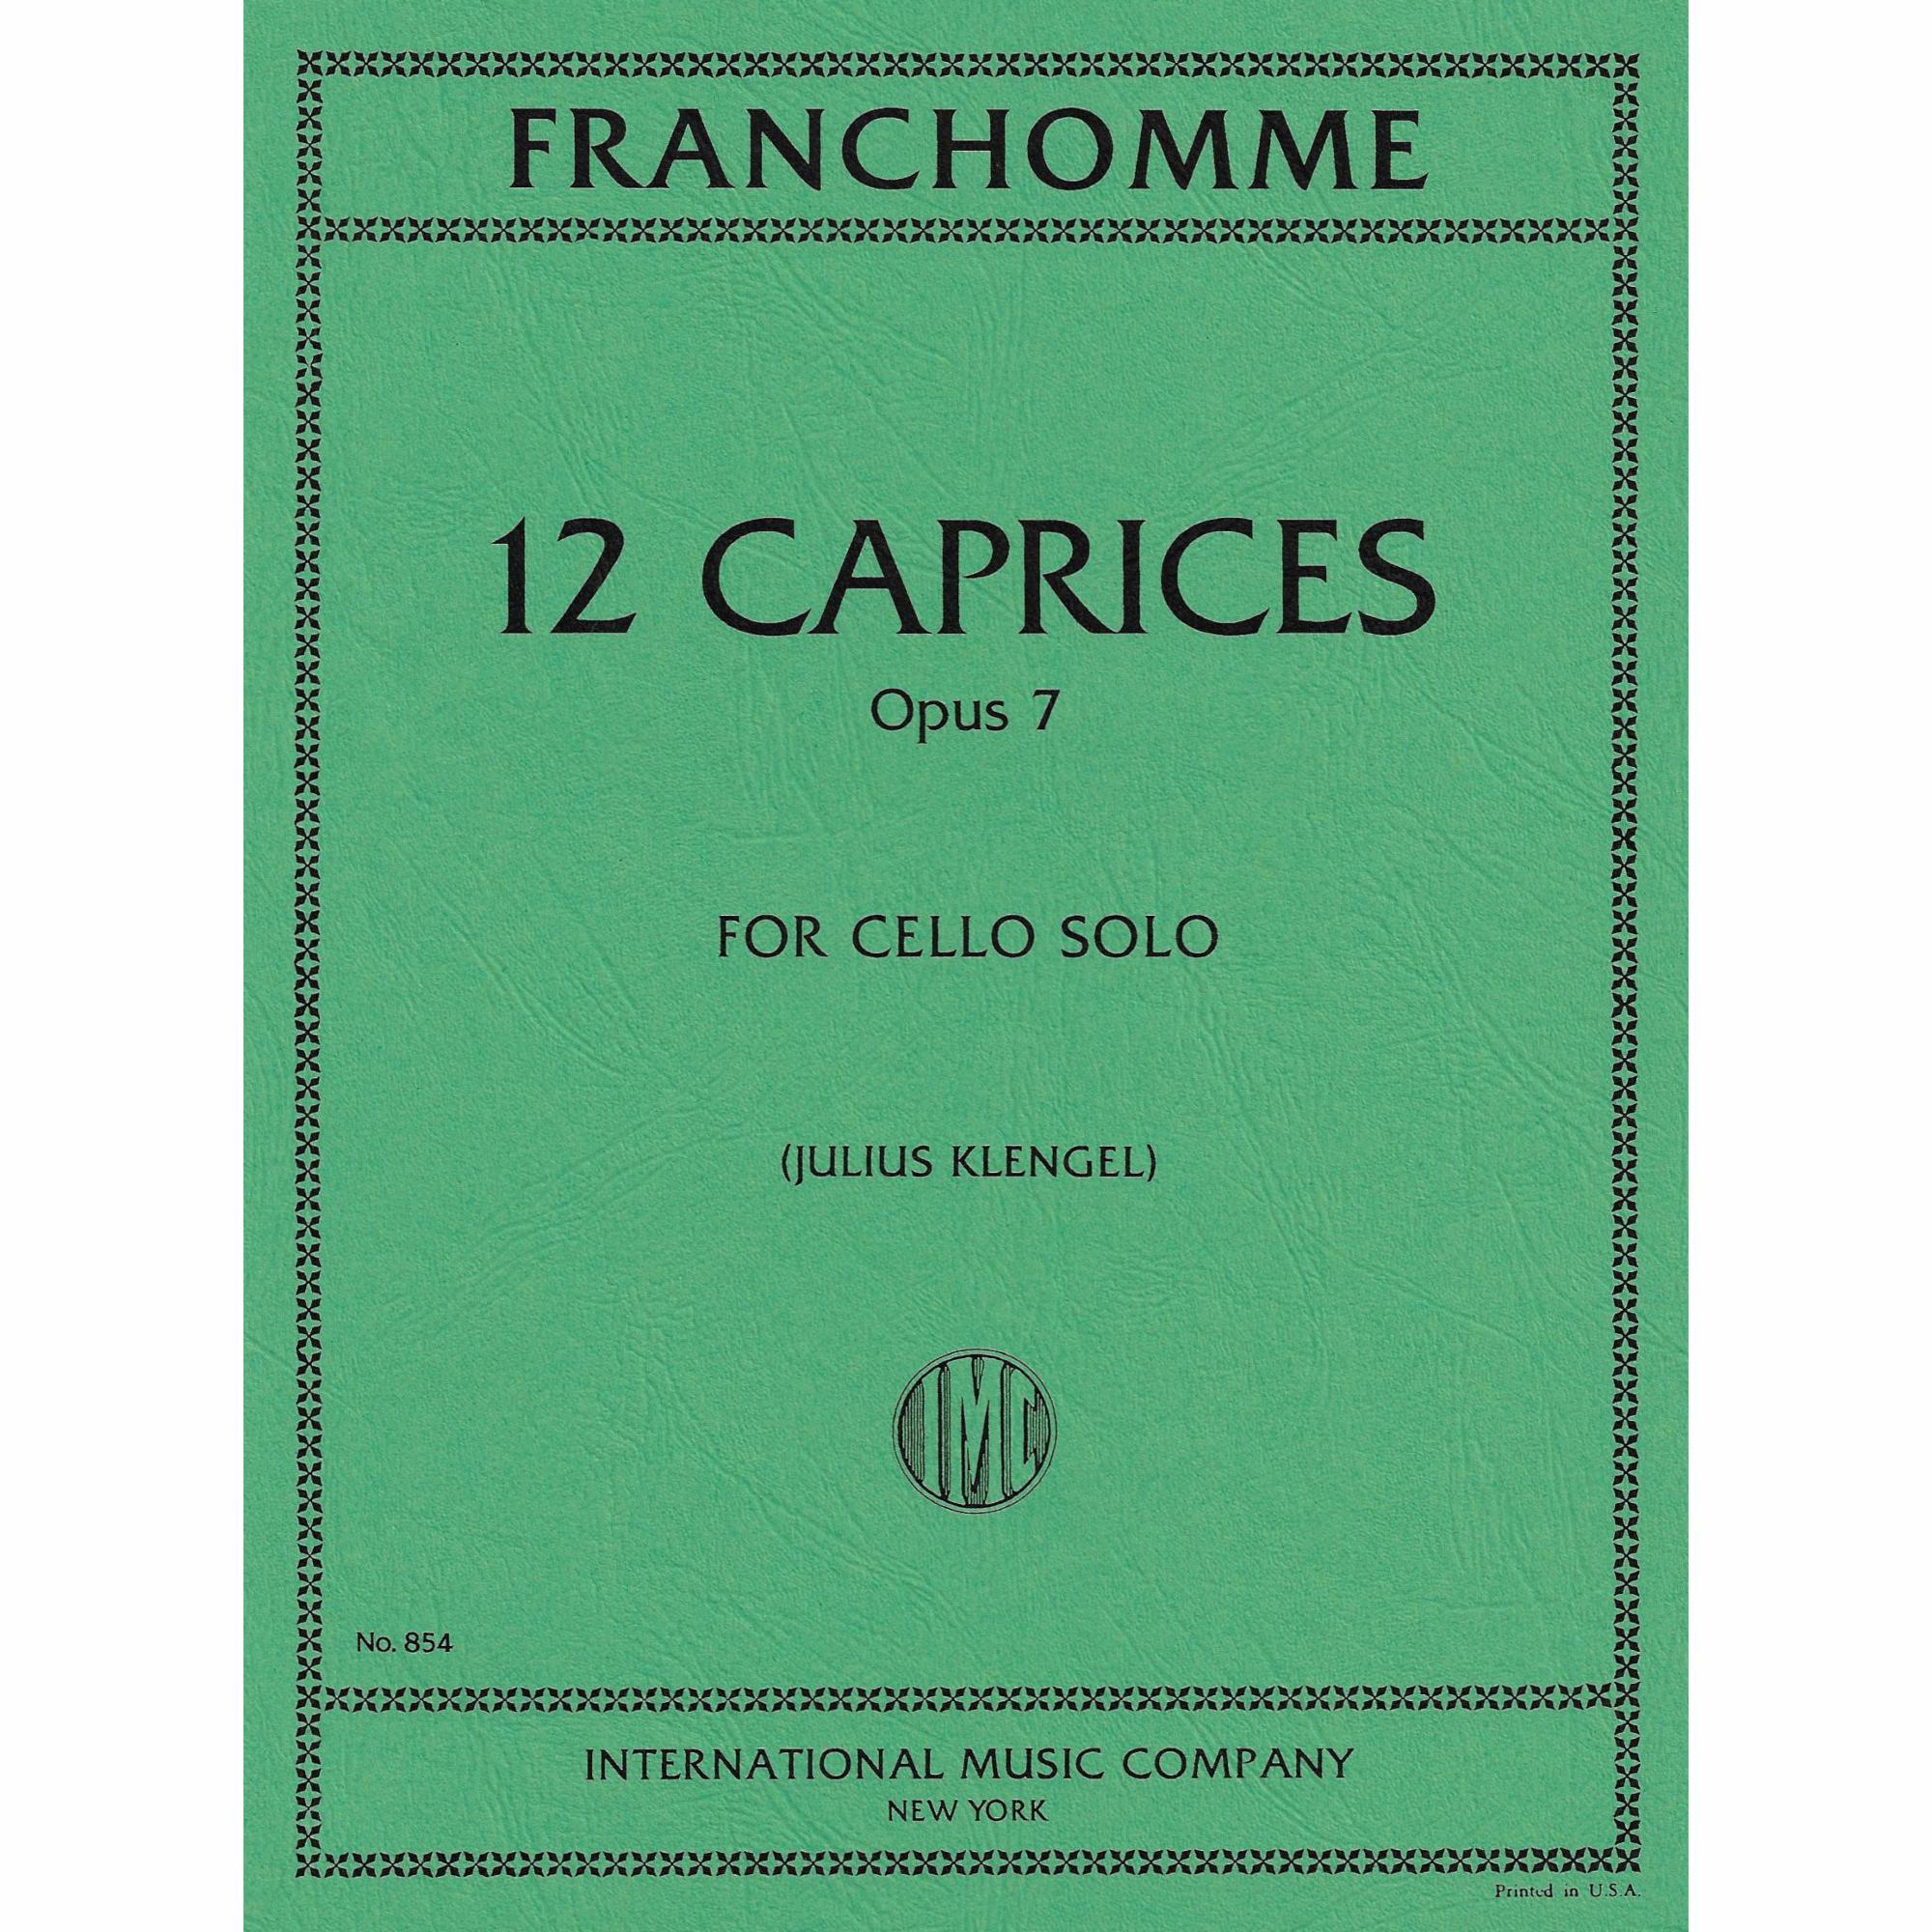 Franchomme -- 12 Caprices, Op. 7 for Cello